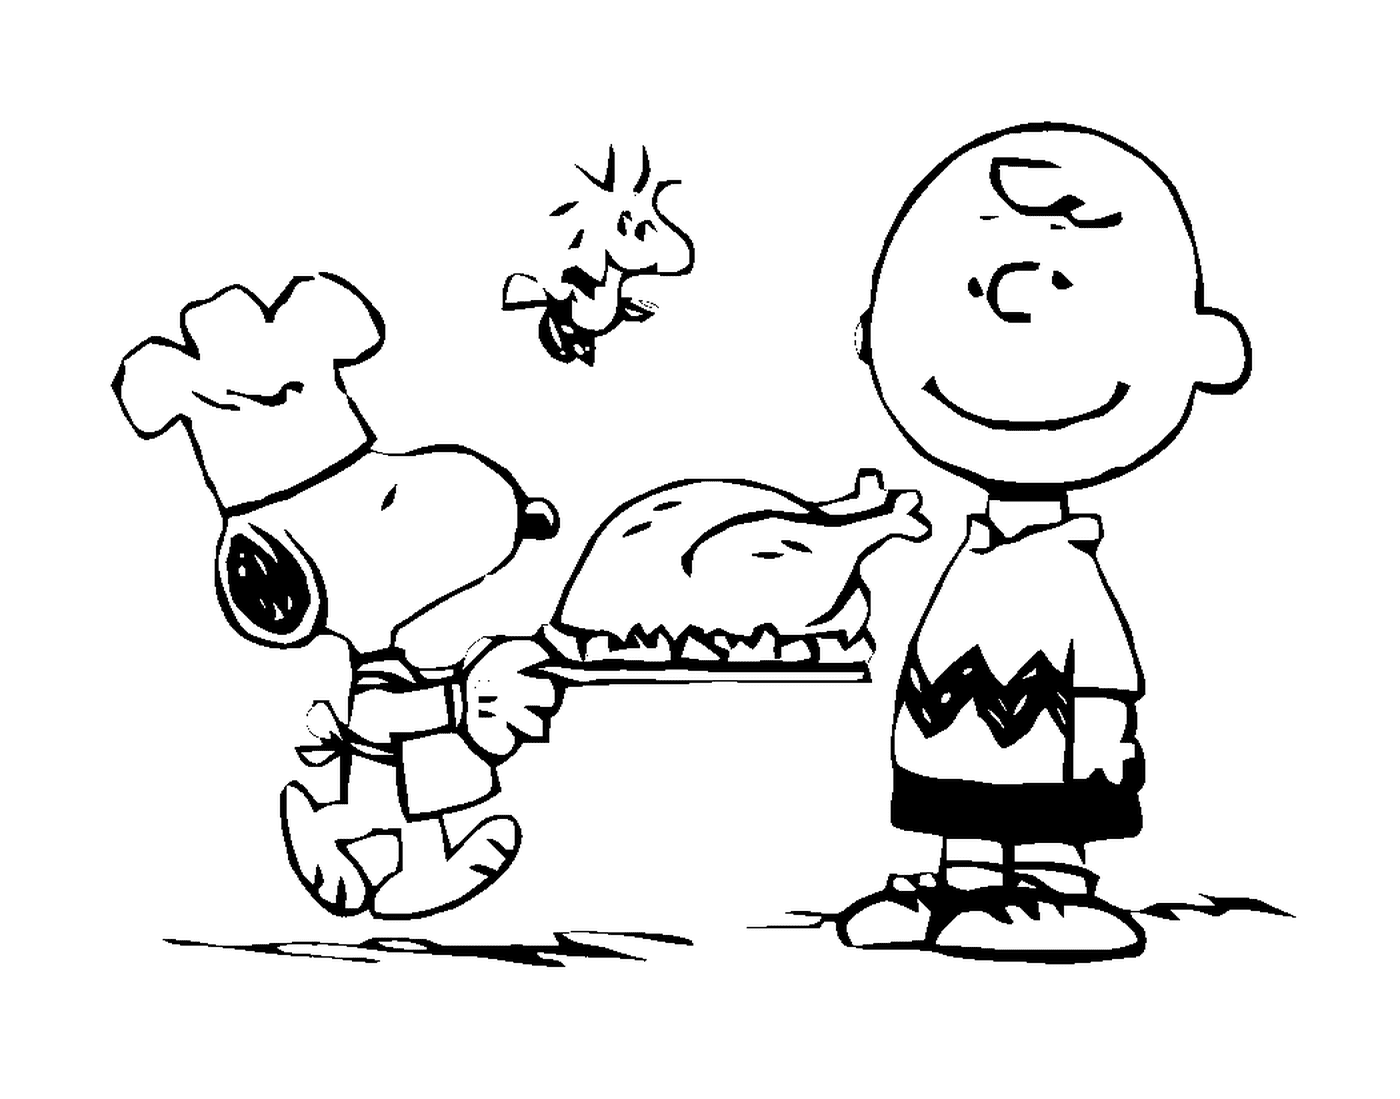  A black and white drawing by Charlie Brown and Snoopy 